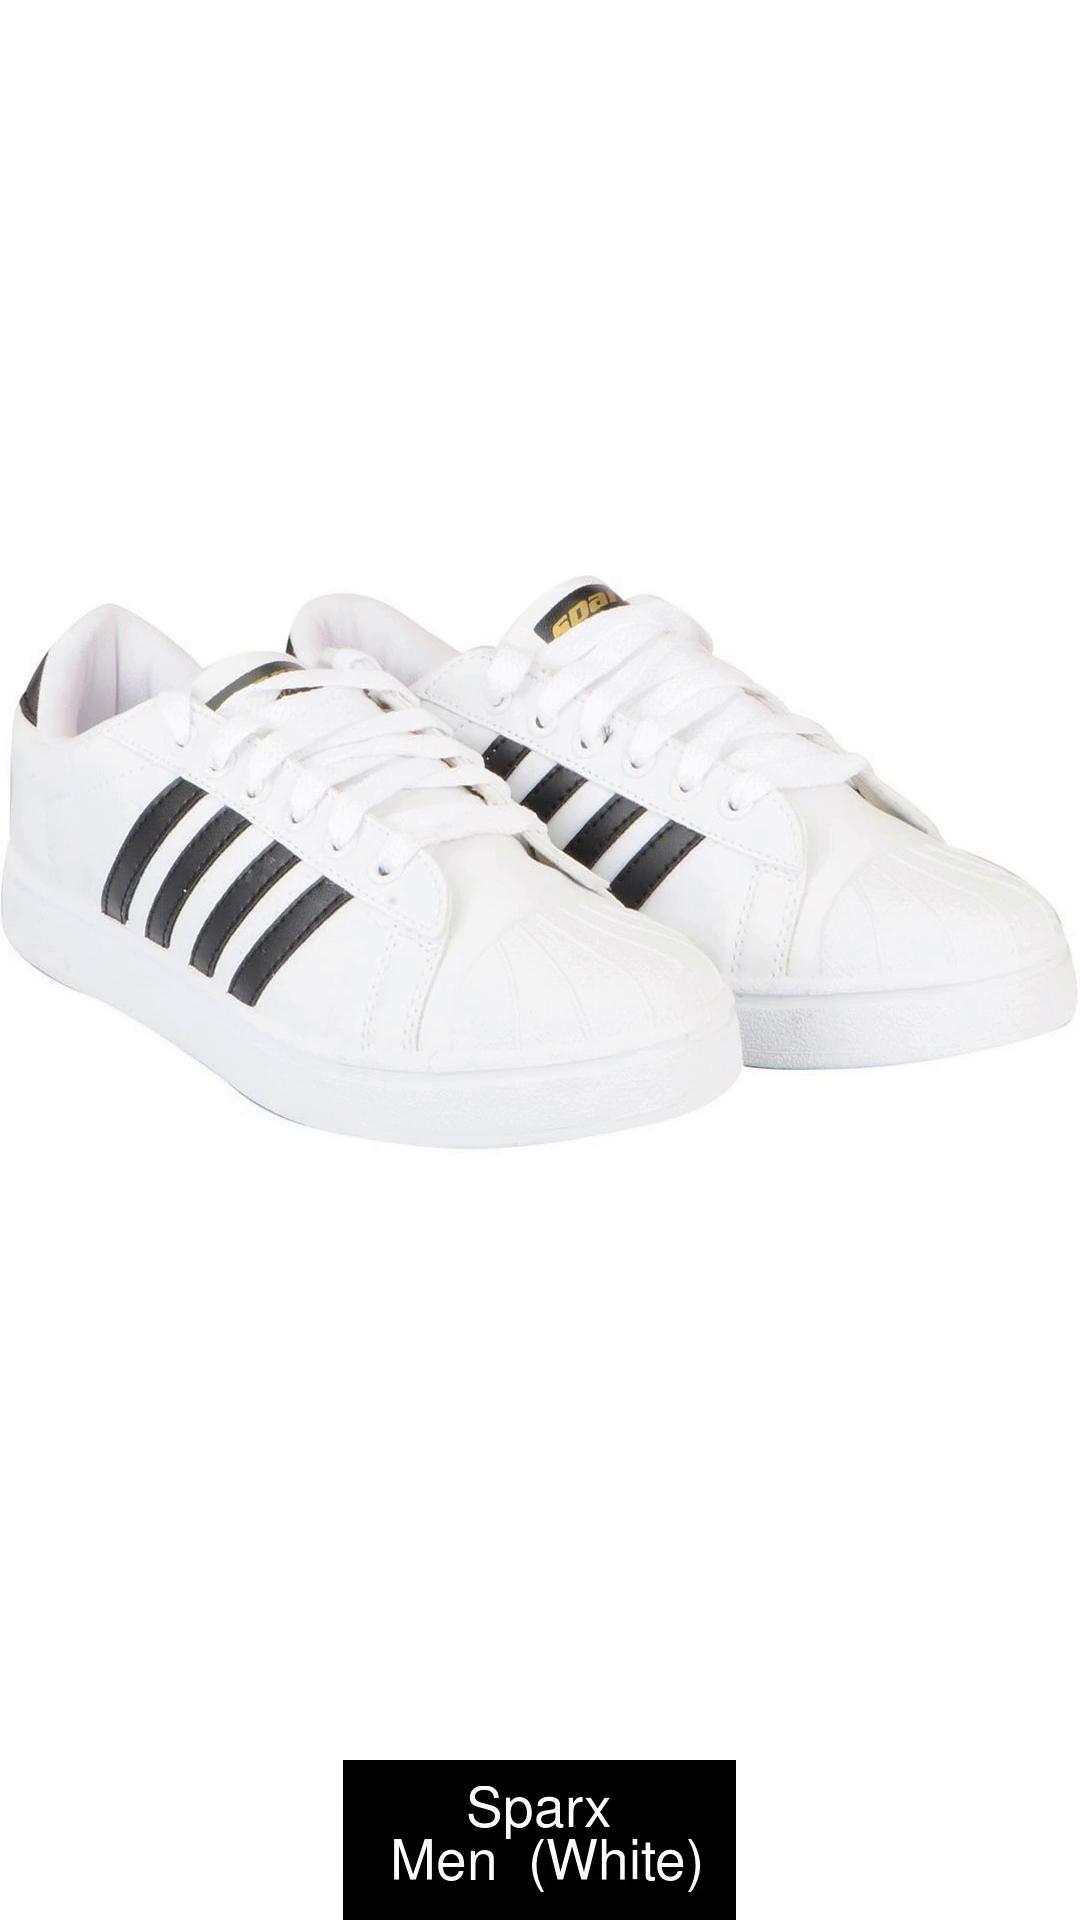 Sparx BLACKWHITE GENTS SPORTS ShoesSM323 in Proddatur at best price by  Shanti Shoe Mart  Justdial